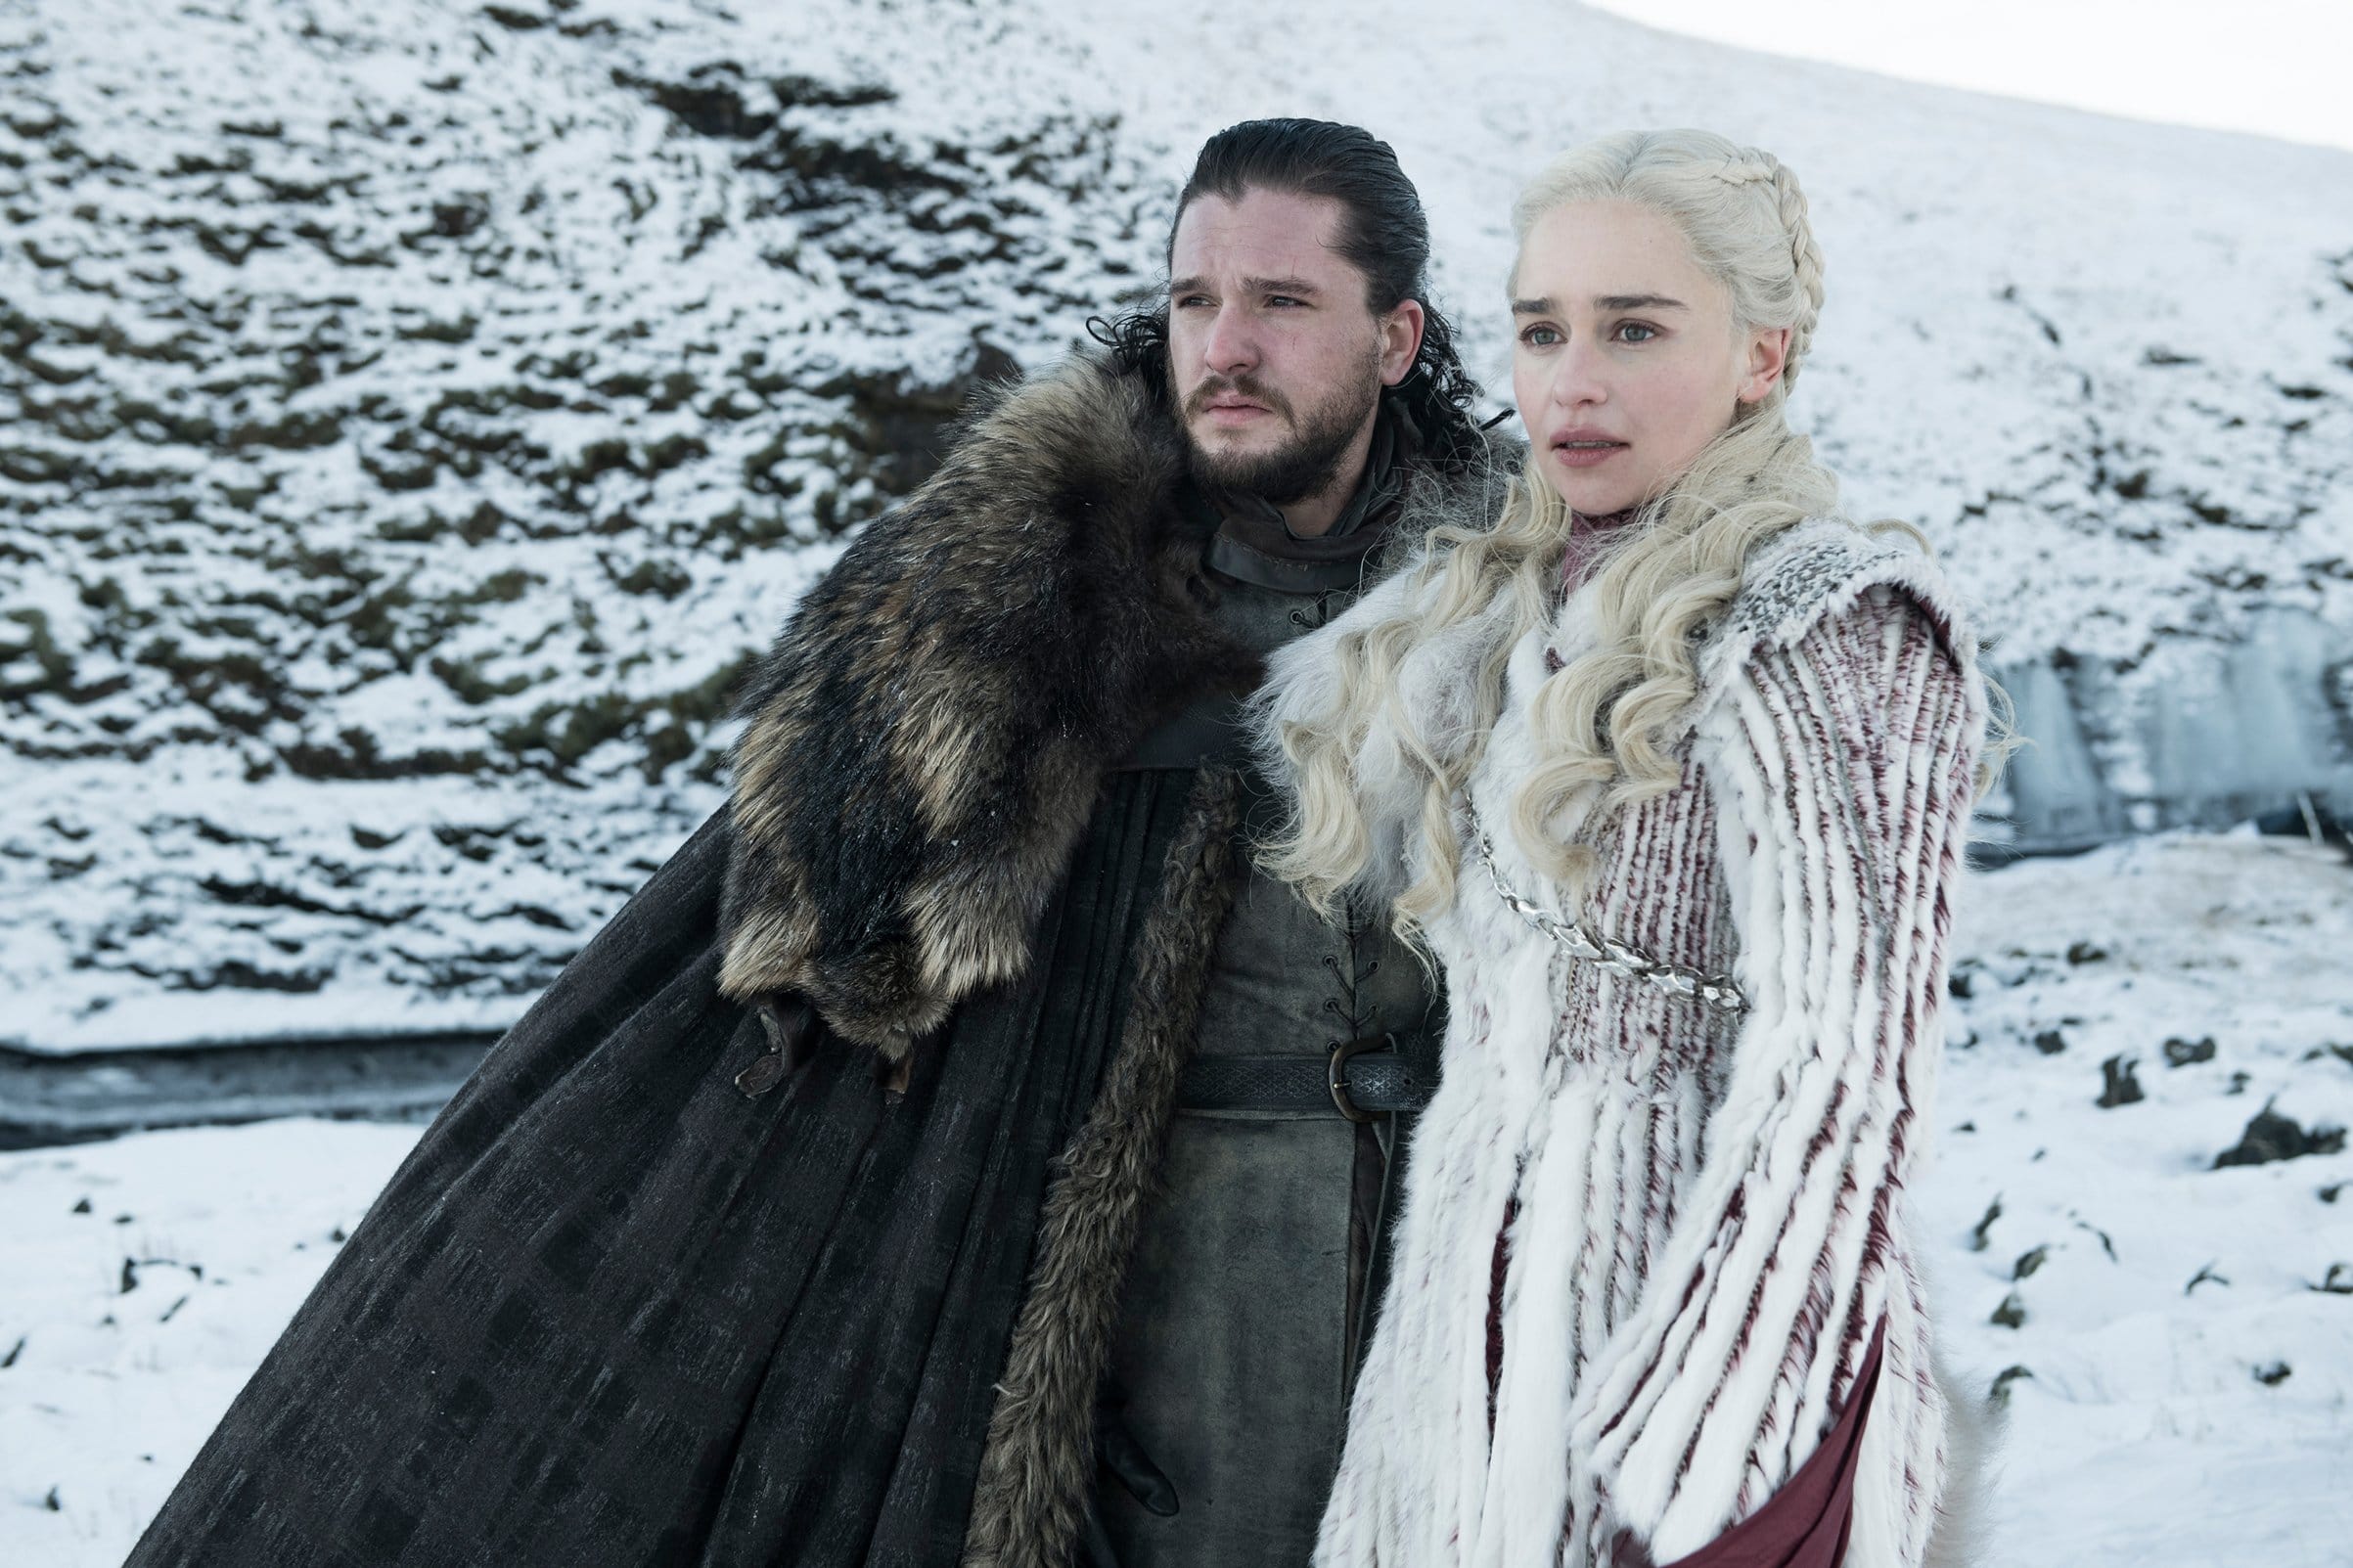 final four episodes of game of thrones will have a runtime of up to 90 minutes